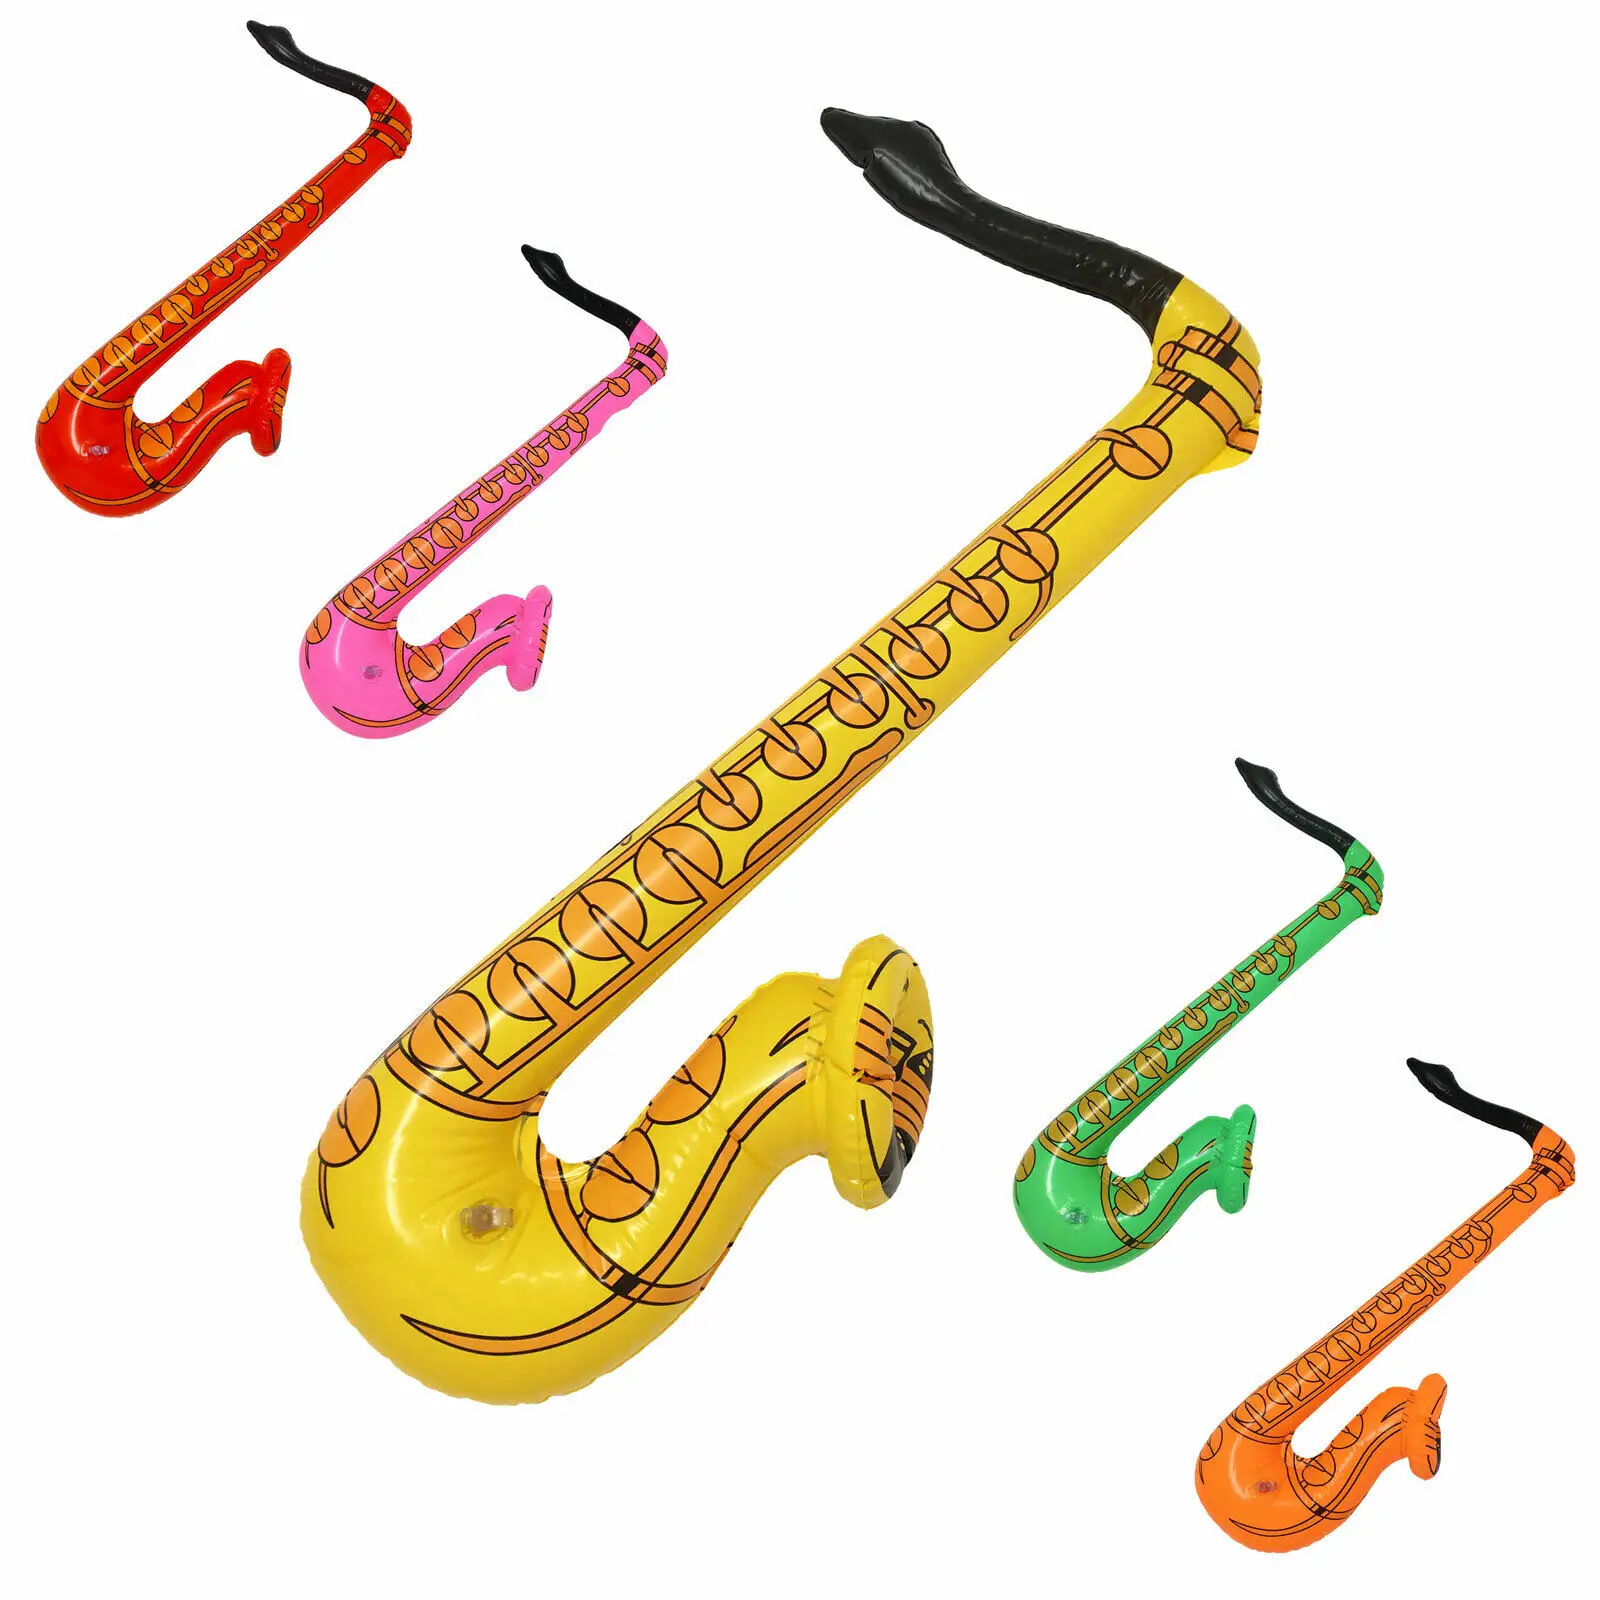 Factory Price Kids Toy Musical Instruments Inflatable Saxophones Blow Up Fancy Dress Party Disco Musical Accessories